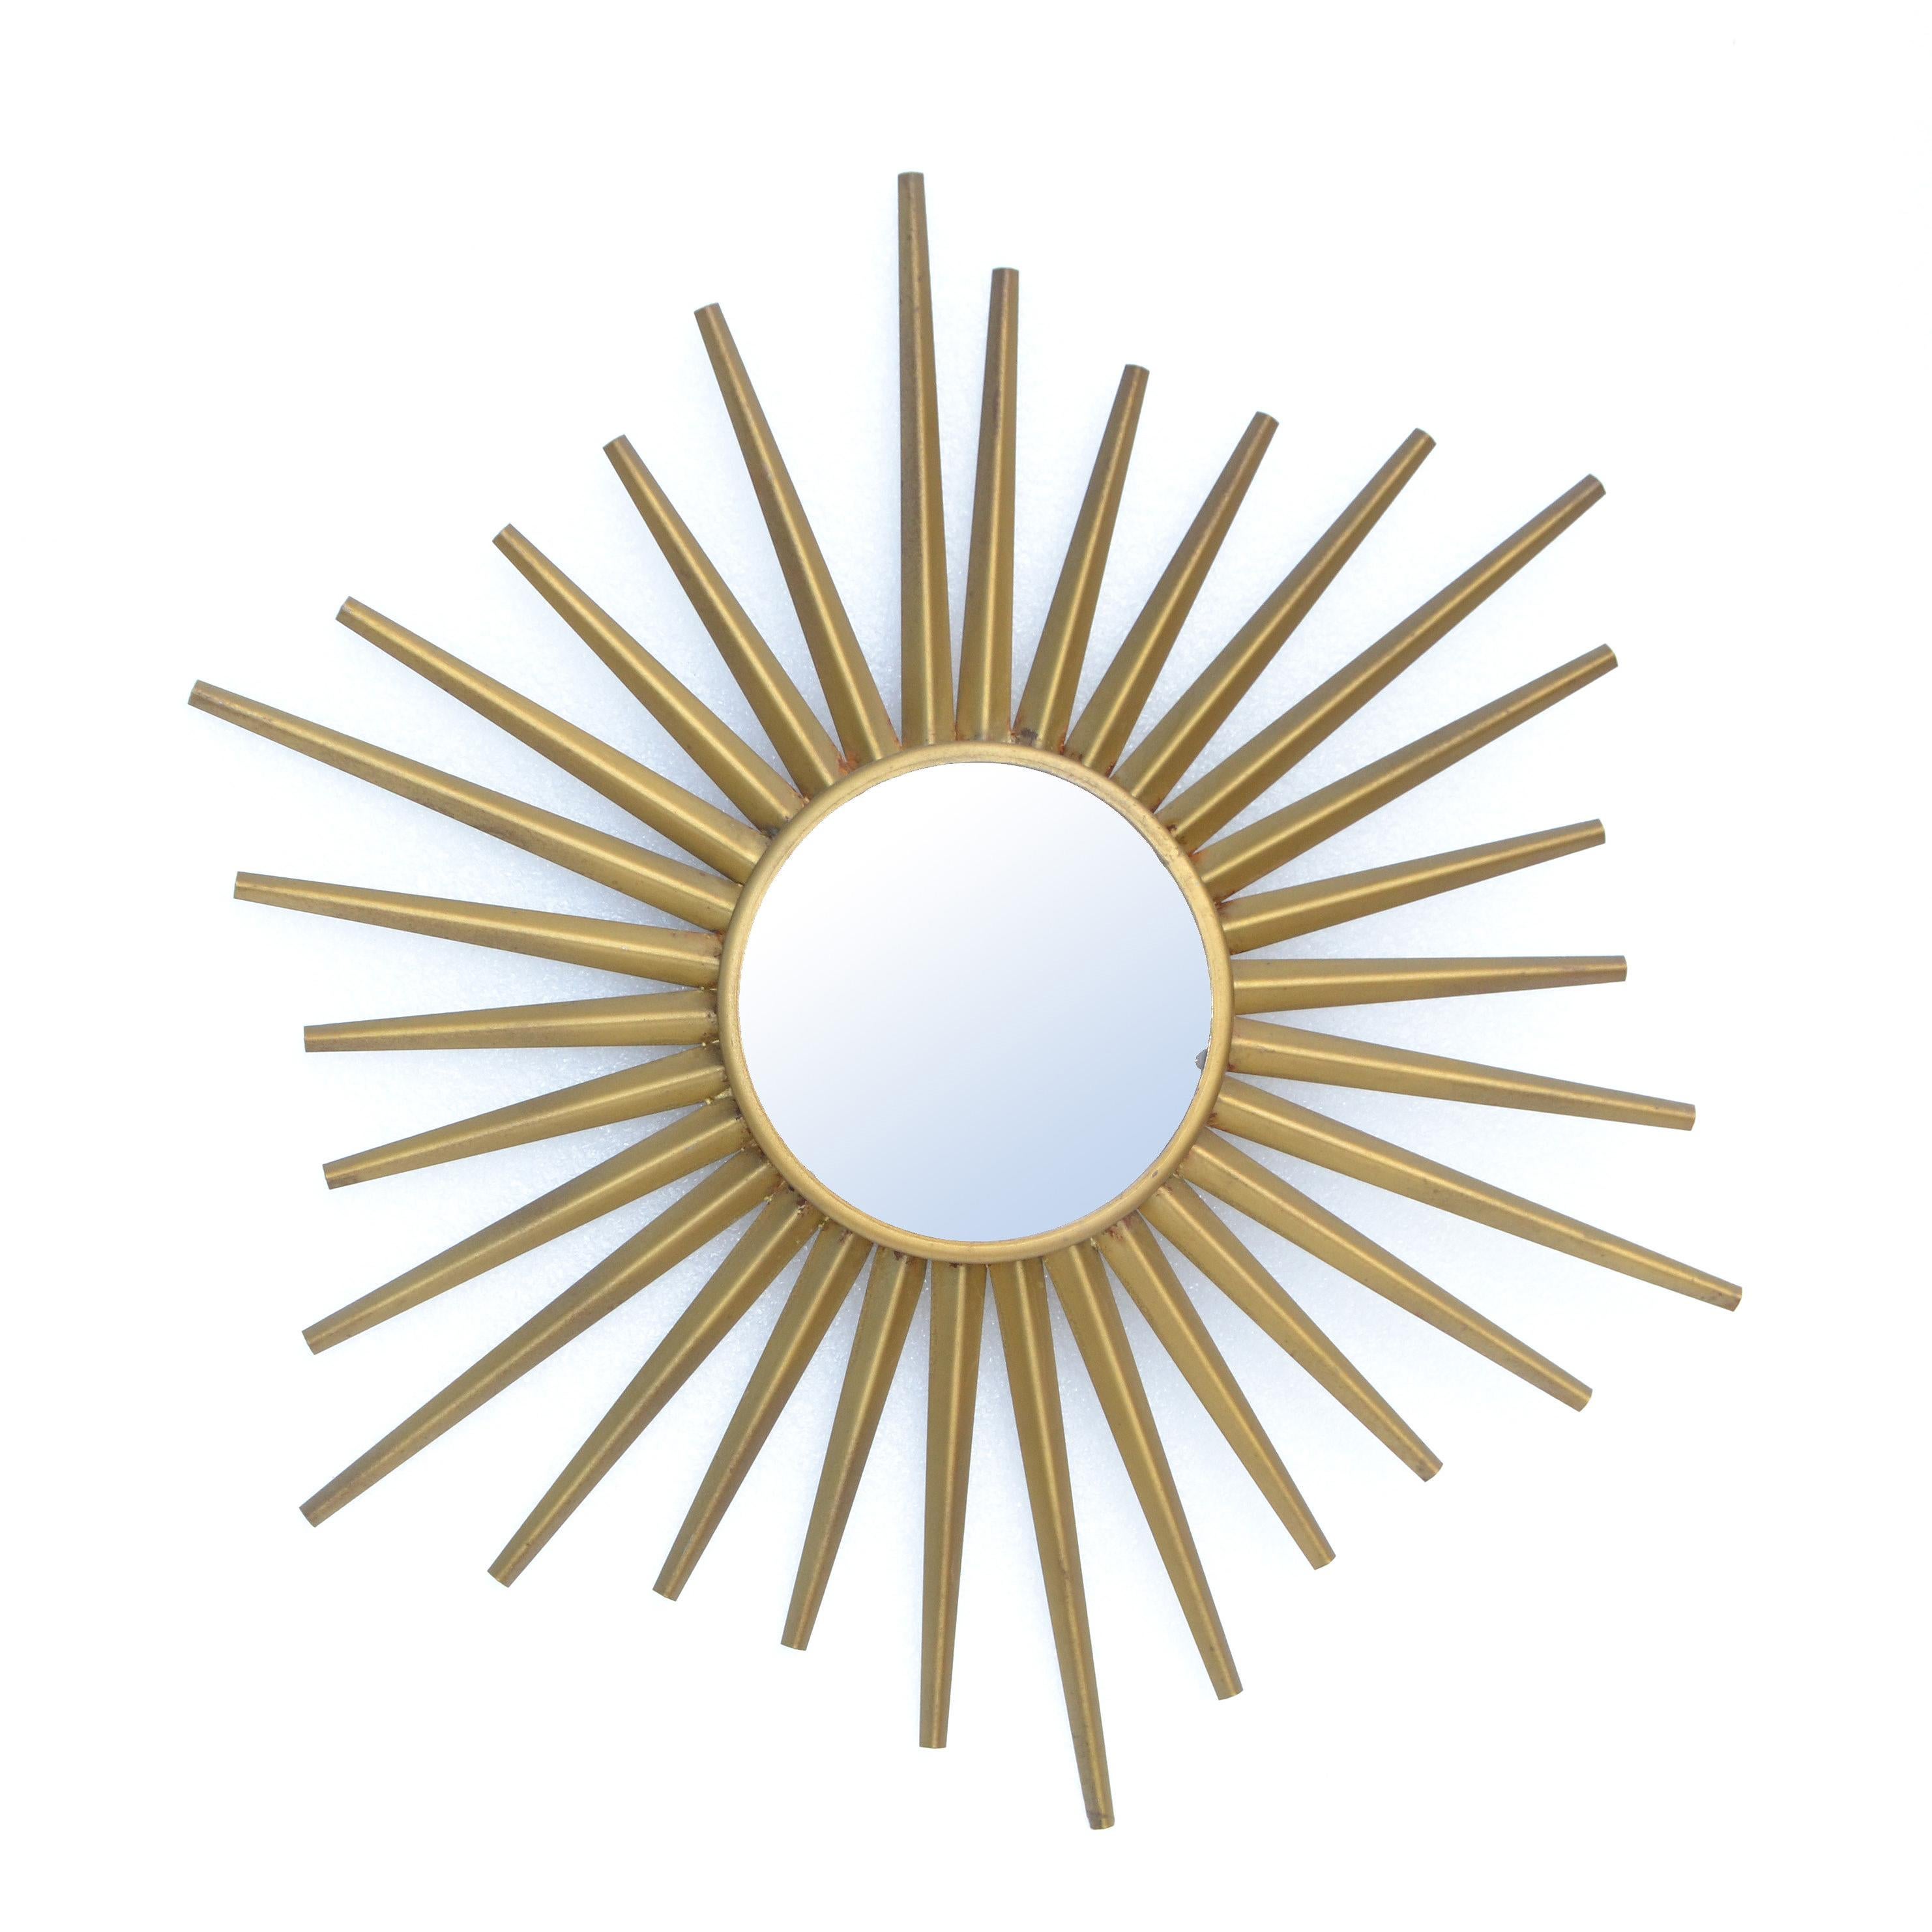 Iron Sunburst Mirror in the Style of Vallauris French Mid-Century Modern Wall Mirror For Sale